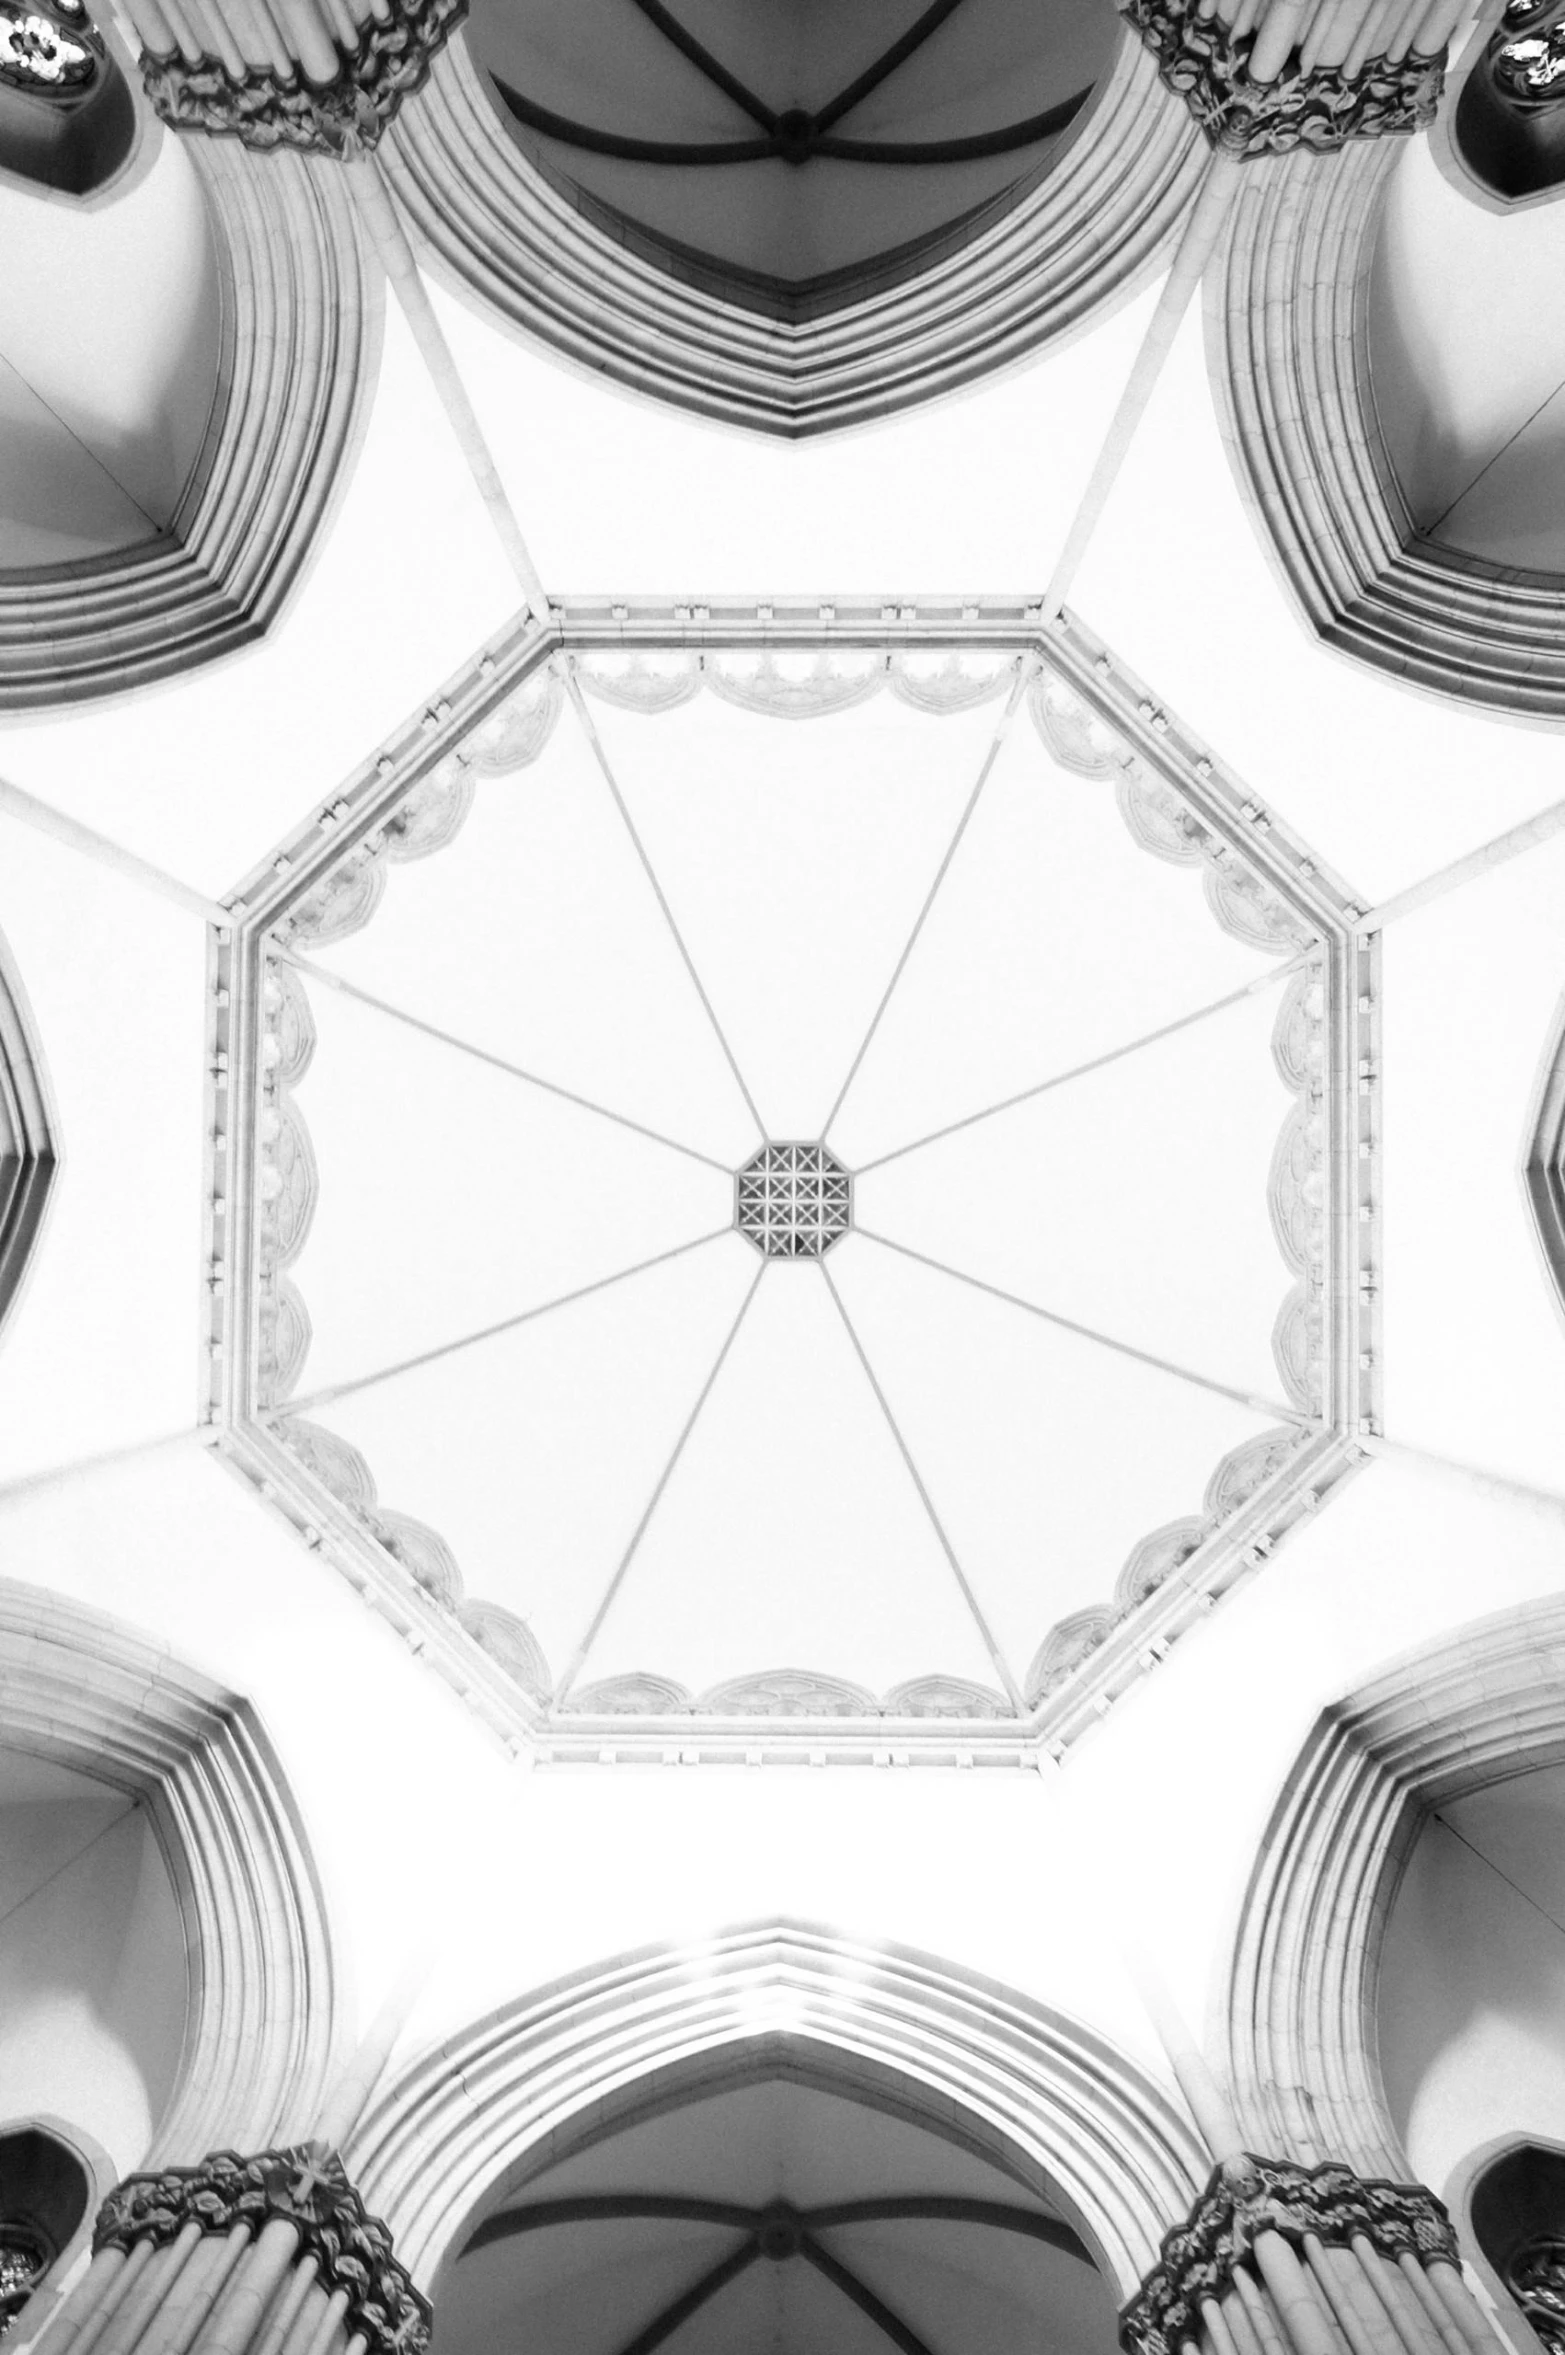 the underside view of a white dome with ornate arches